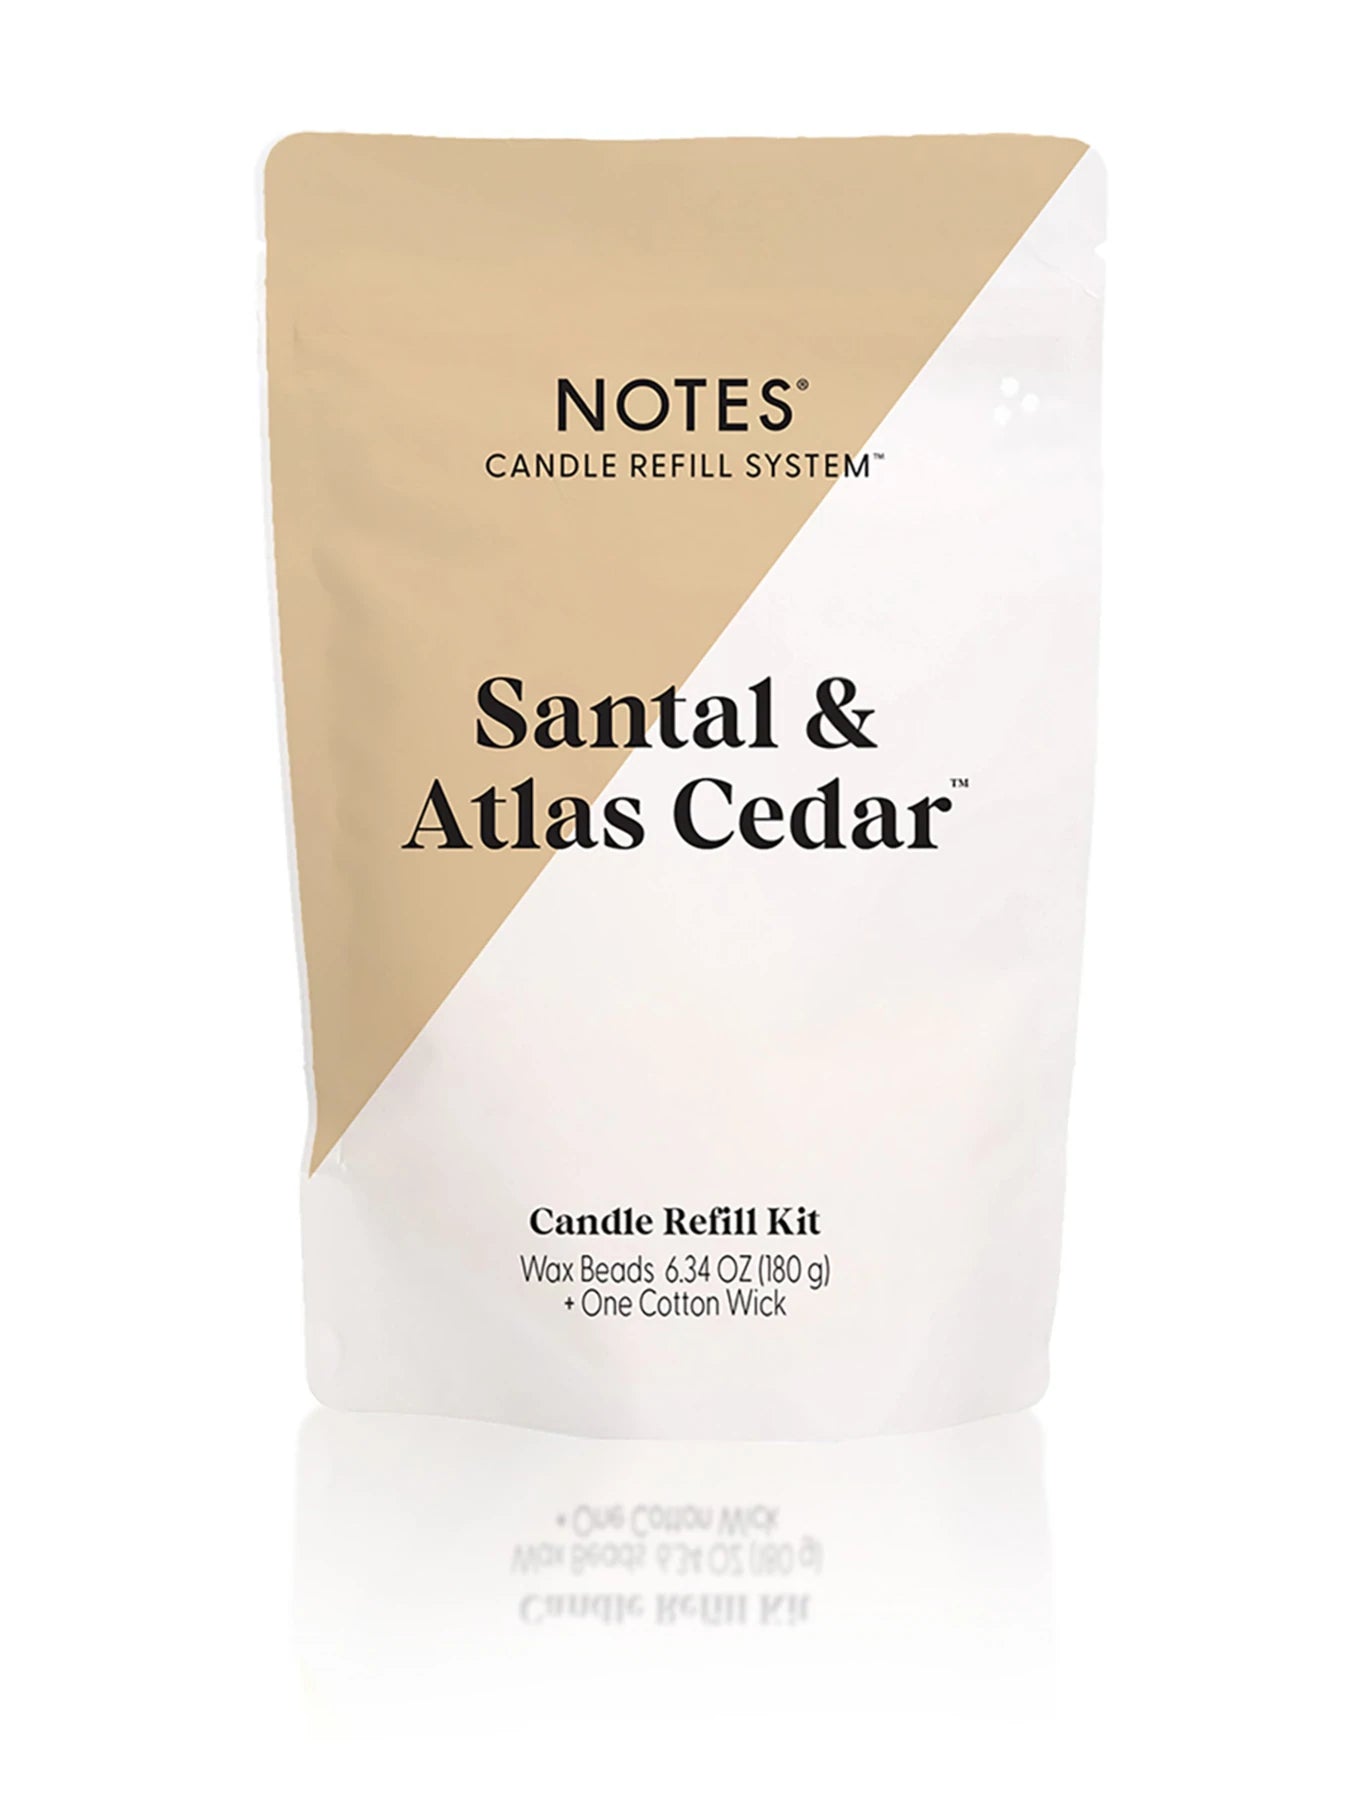 NOTES® Candle Refill Kits